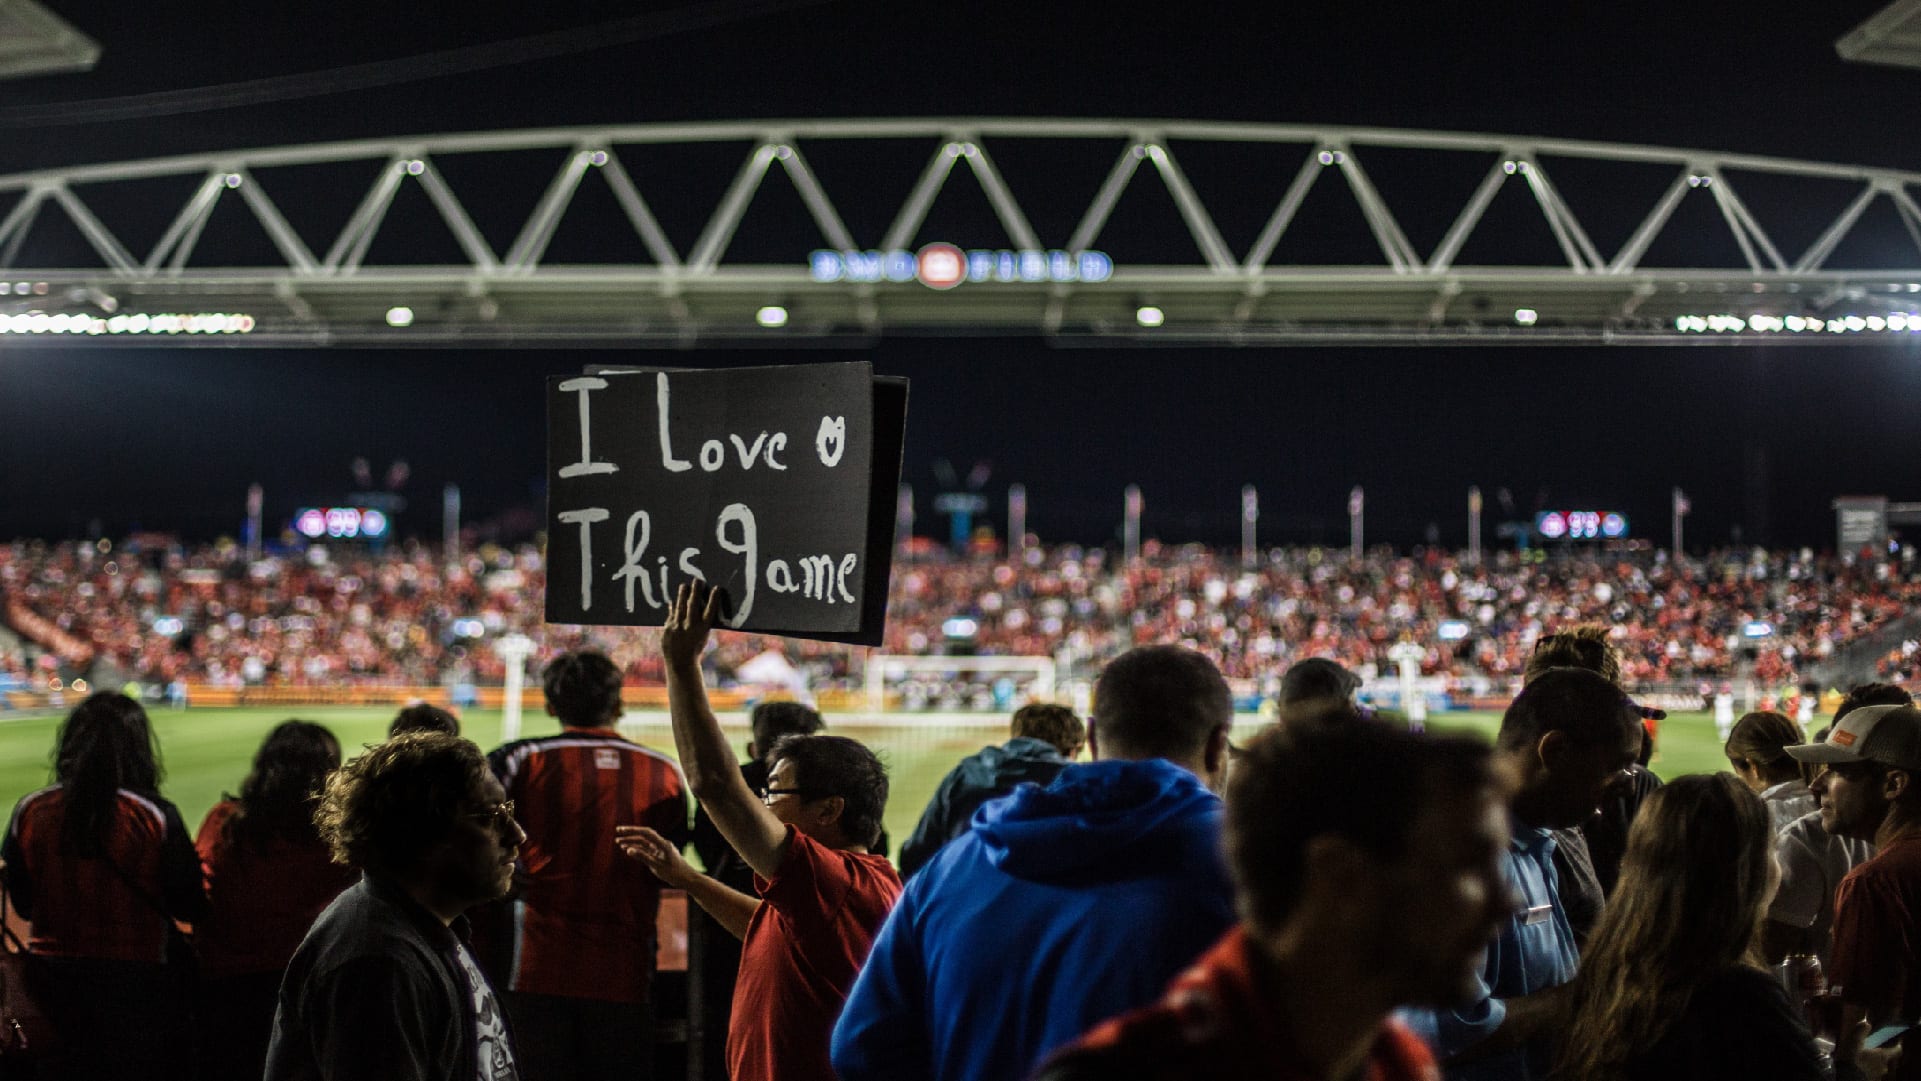 I love this game placard held by person in the stadium